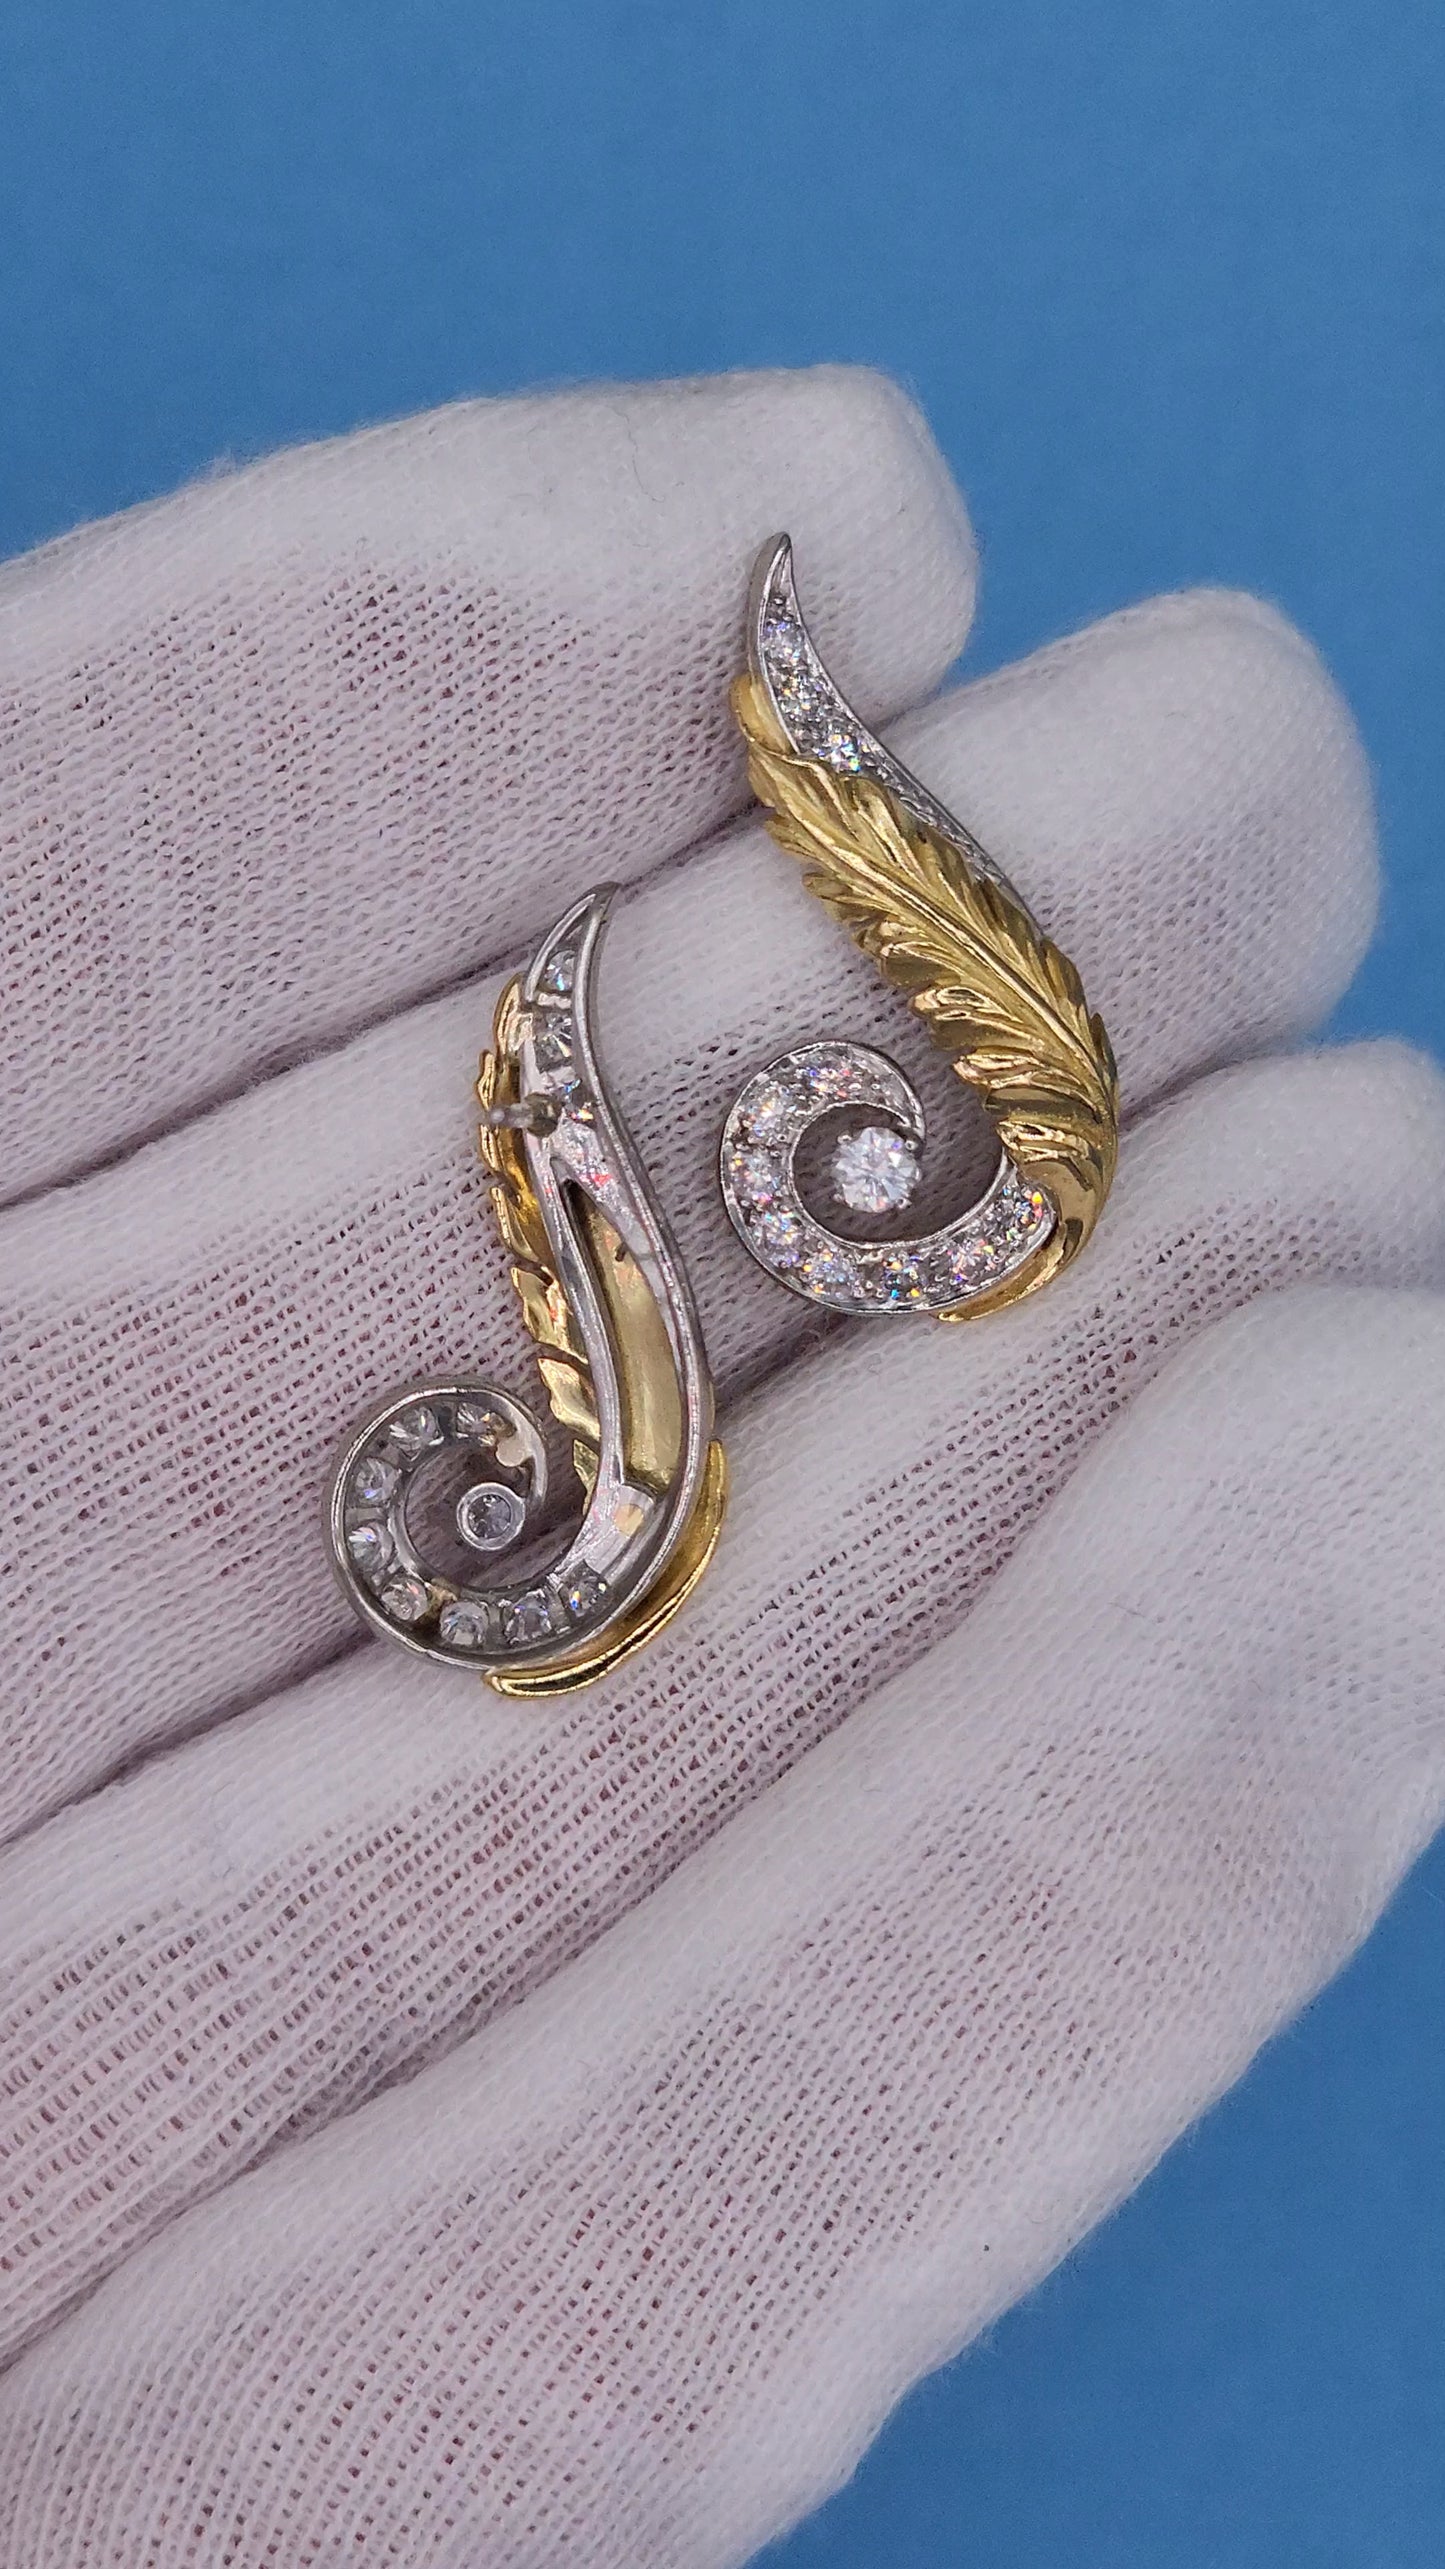 Vintage Diamond Swirl Drop Earrings in Platinum and 18K Yellow Gold